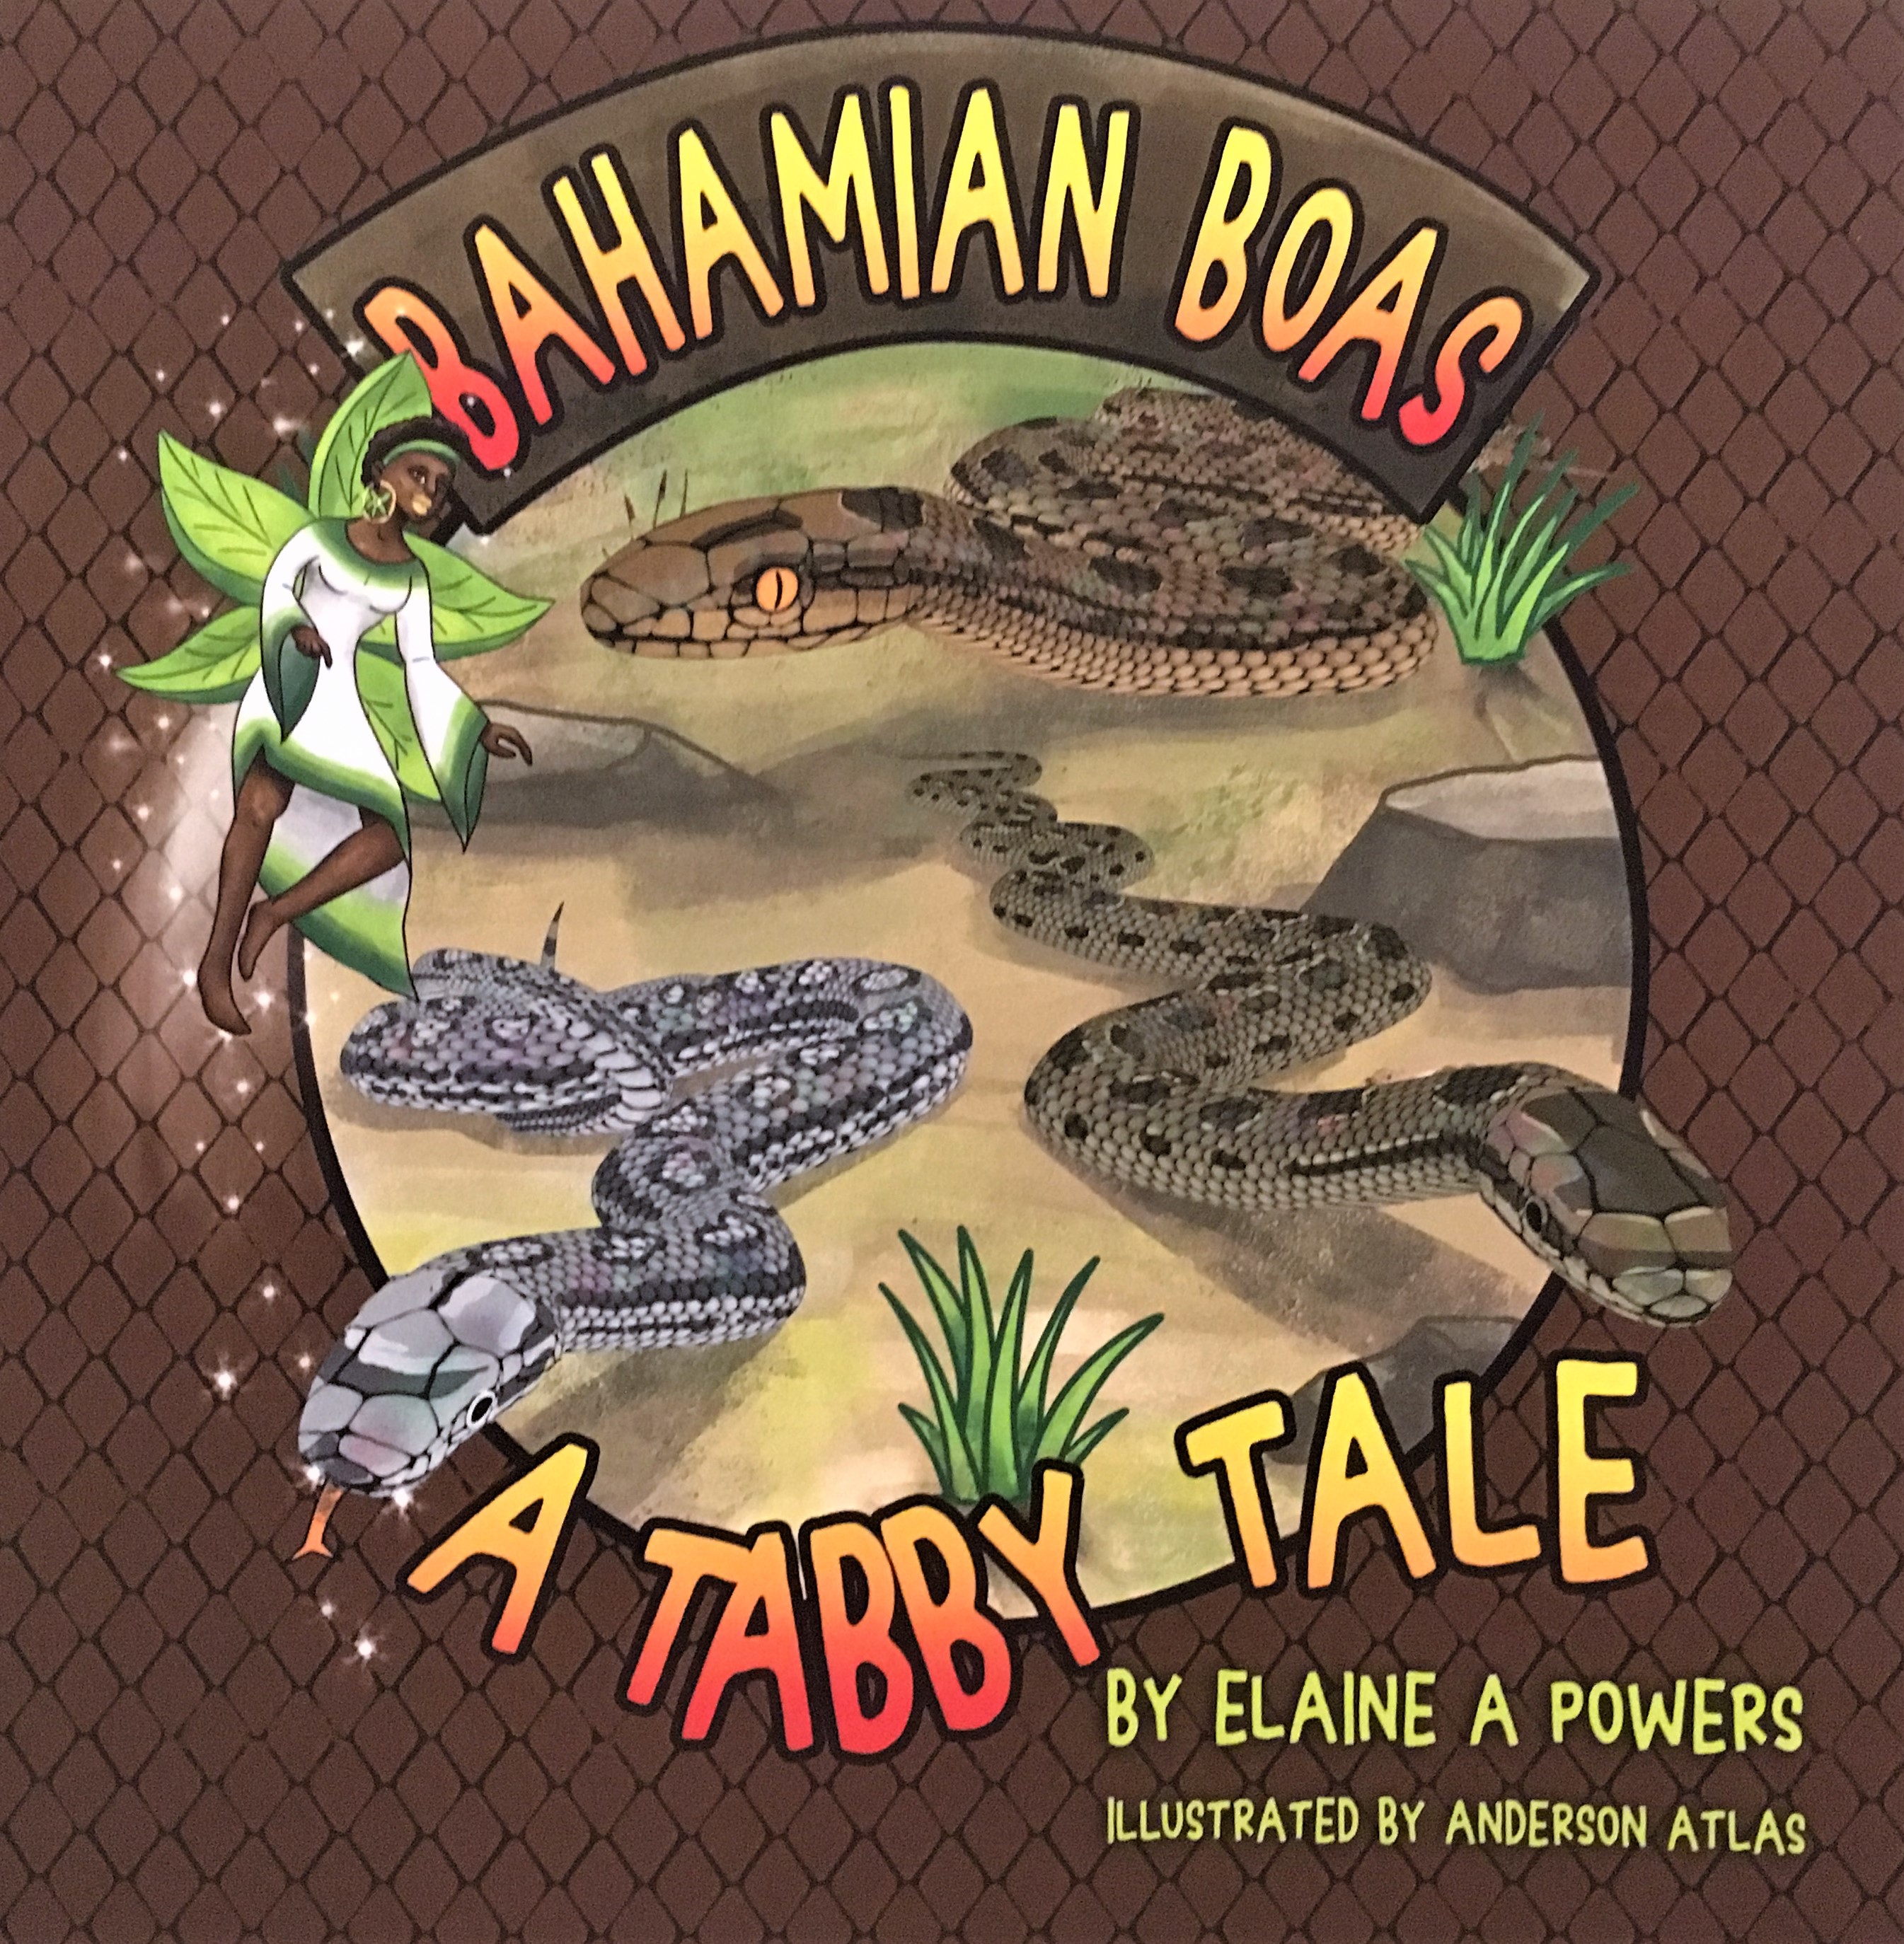 A children's book cover, brown background, orange and yellow lettering, with images of snakes from the Bahamas